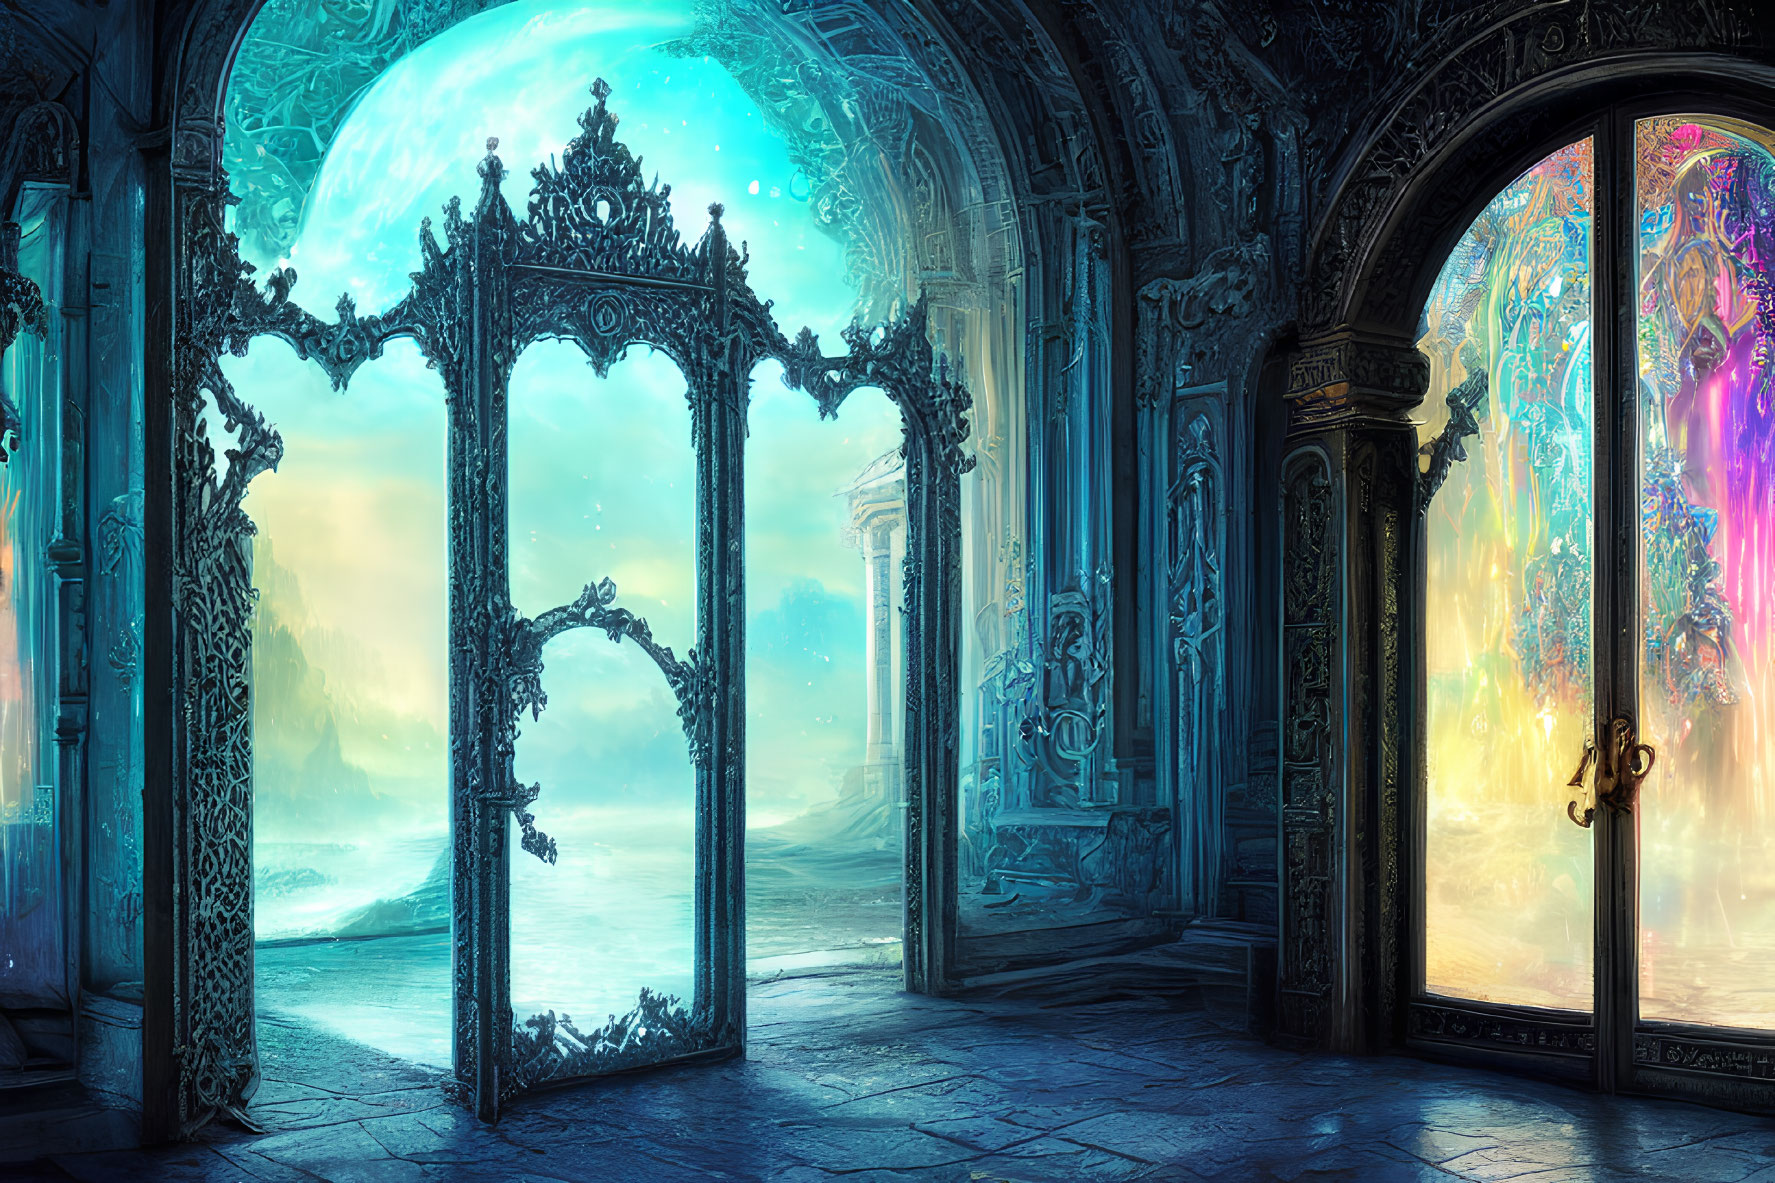 Ornate open doorway to vibrant magical landscape with glowing sky